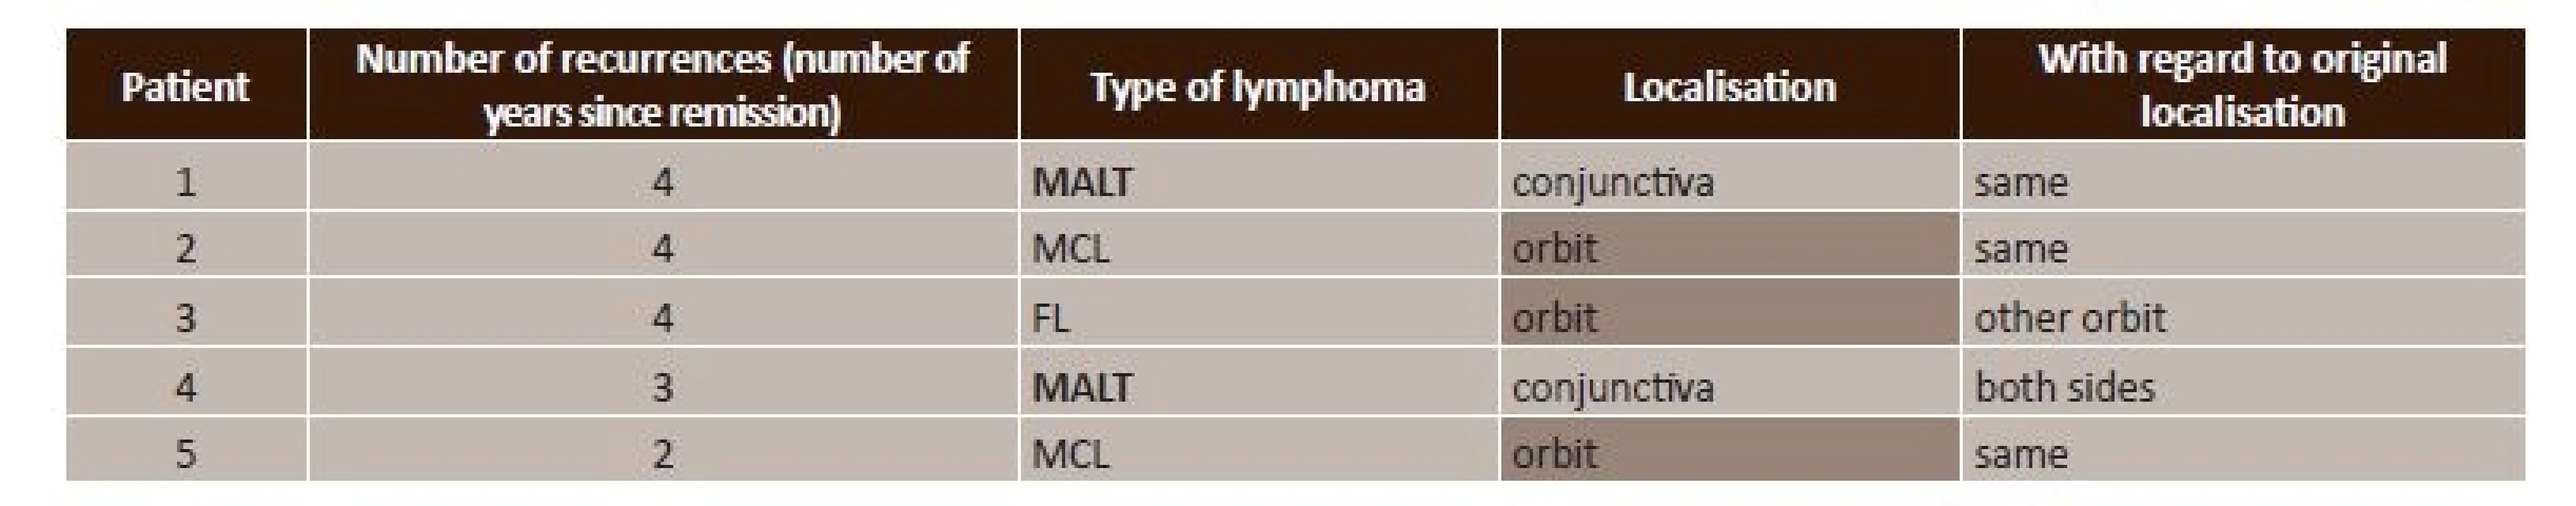 Number of recurrences depending on localisation according to type of lymphoma